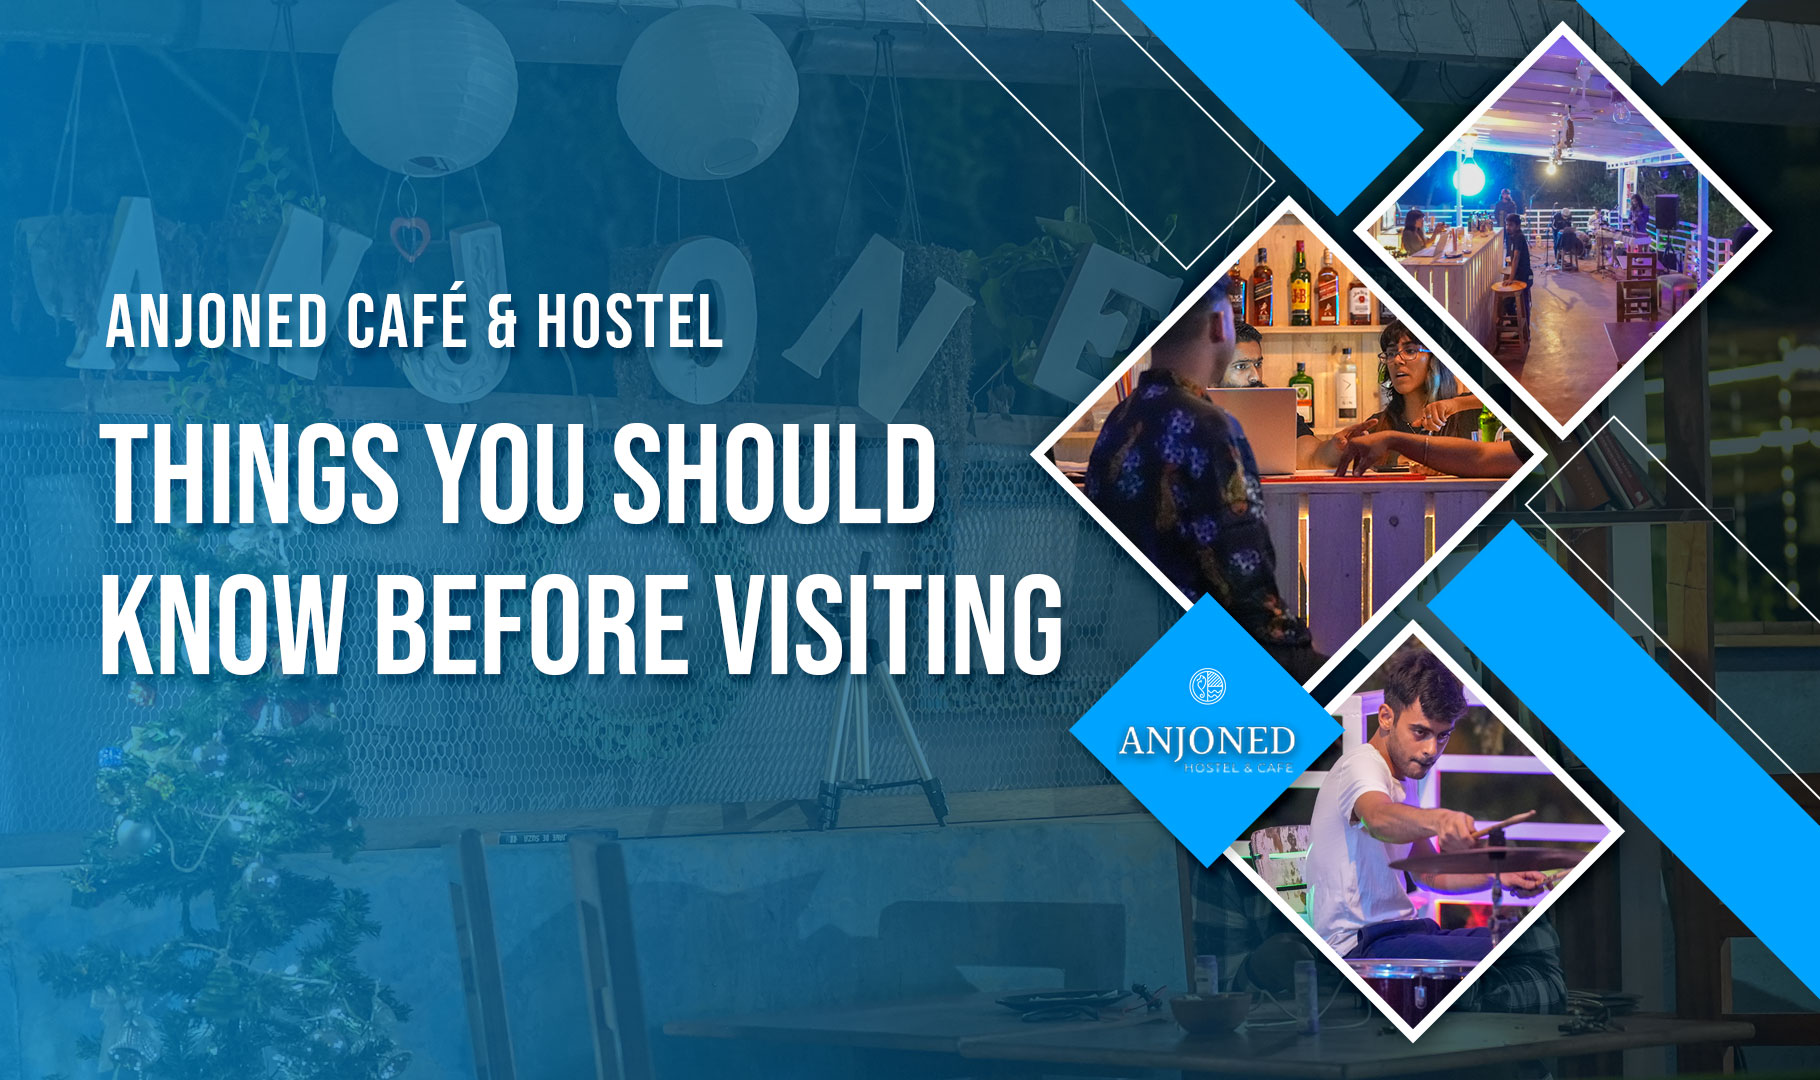 Anjoned Cafe & Hostel- Things You Should Know Before Visiting